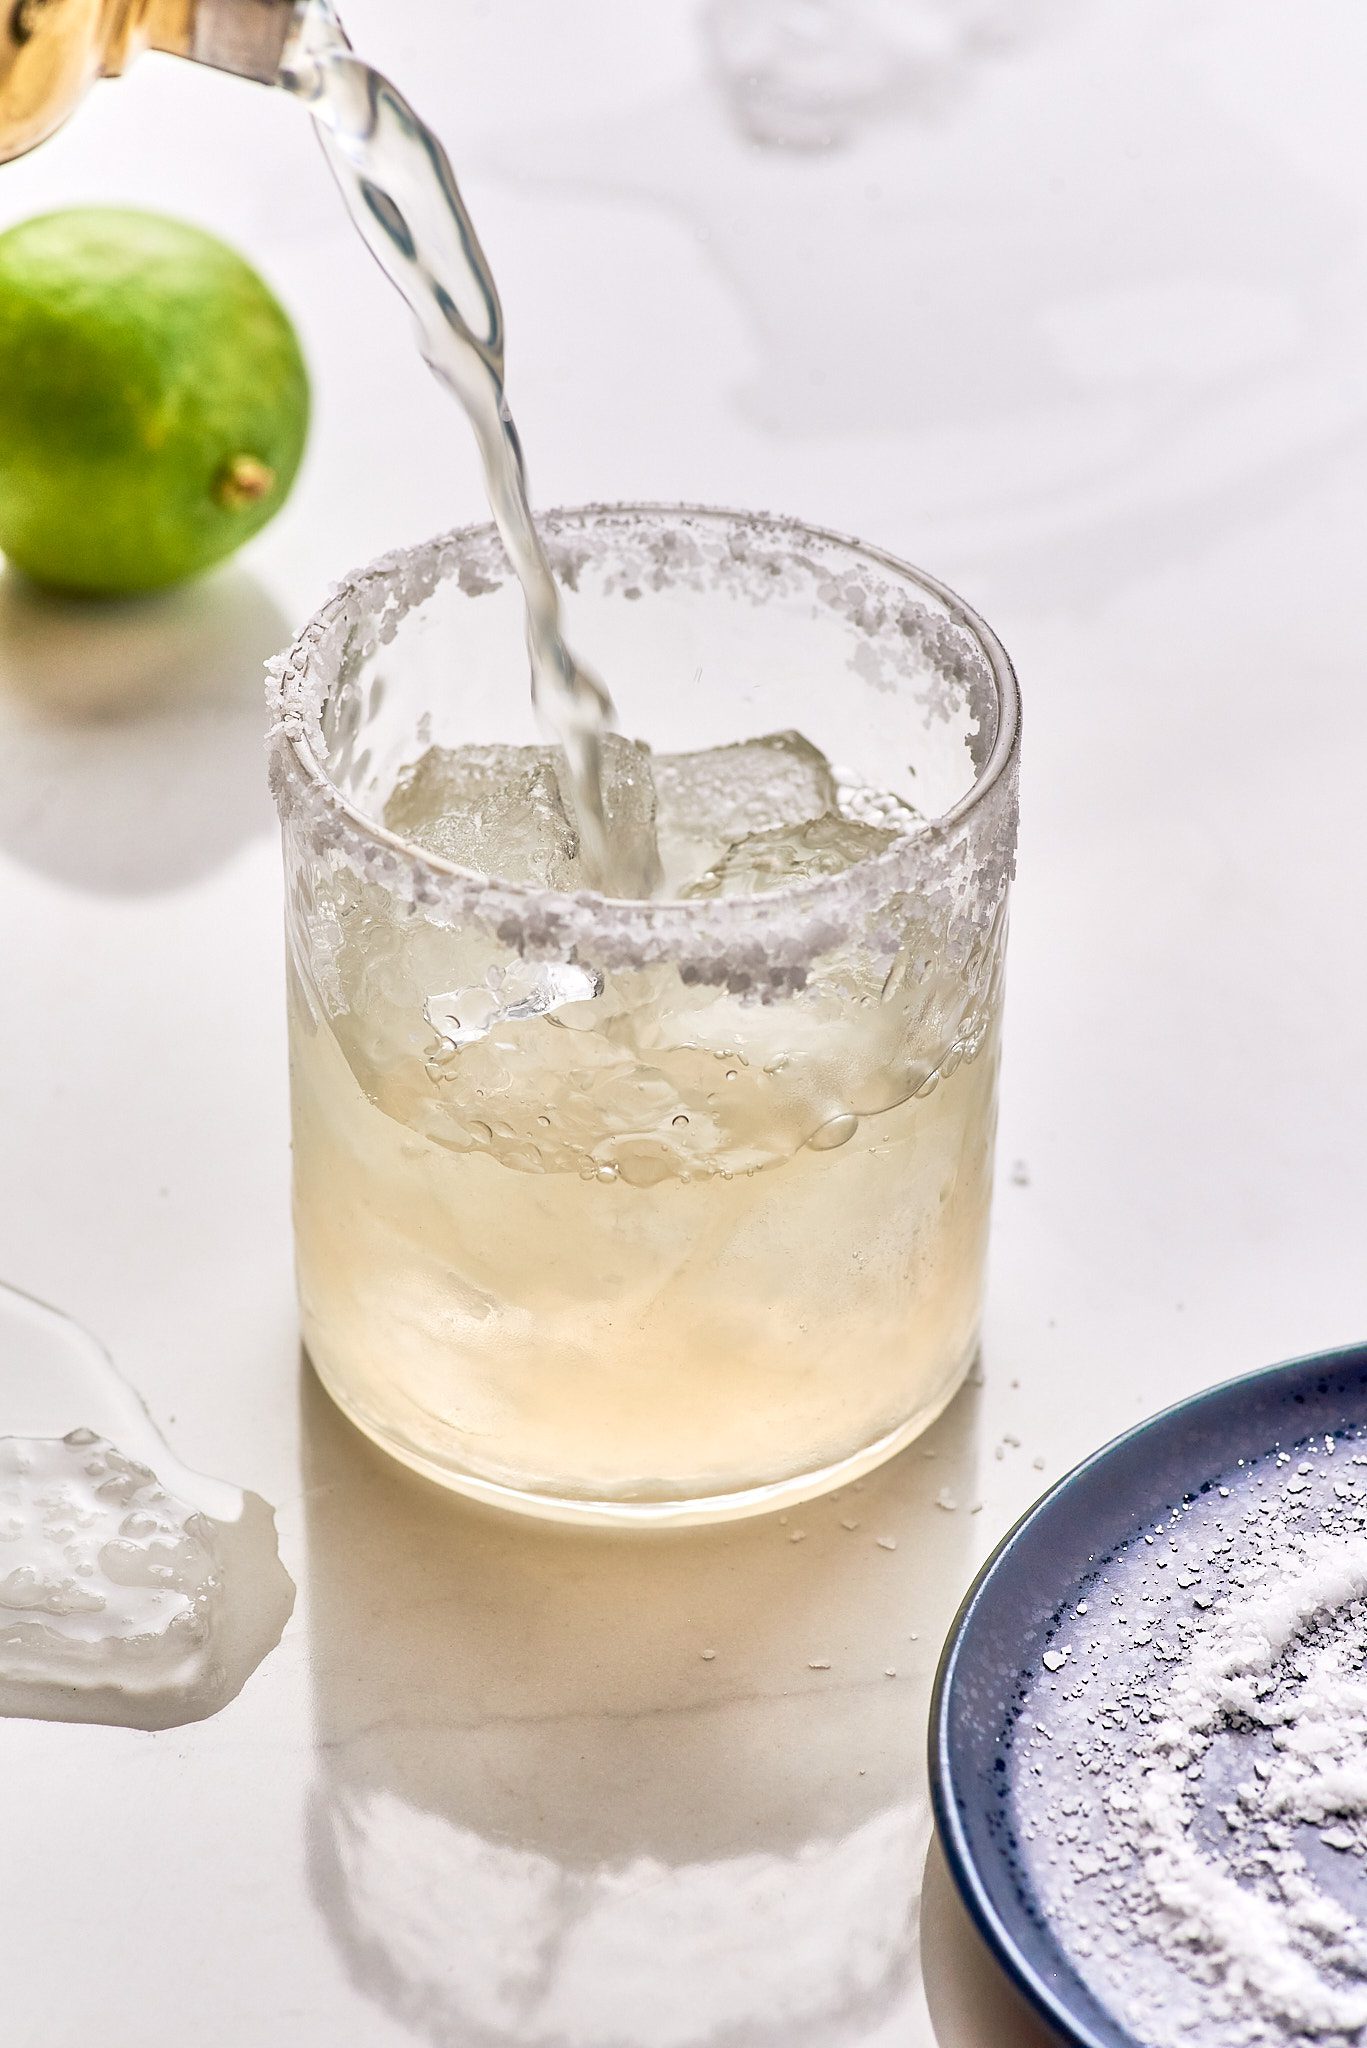 Margarita with salt rim on a glass. Lime on the background and plate with salt in the foreground.